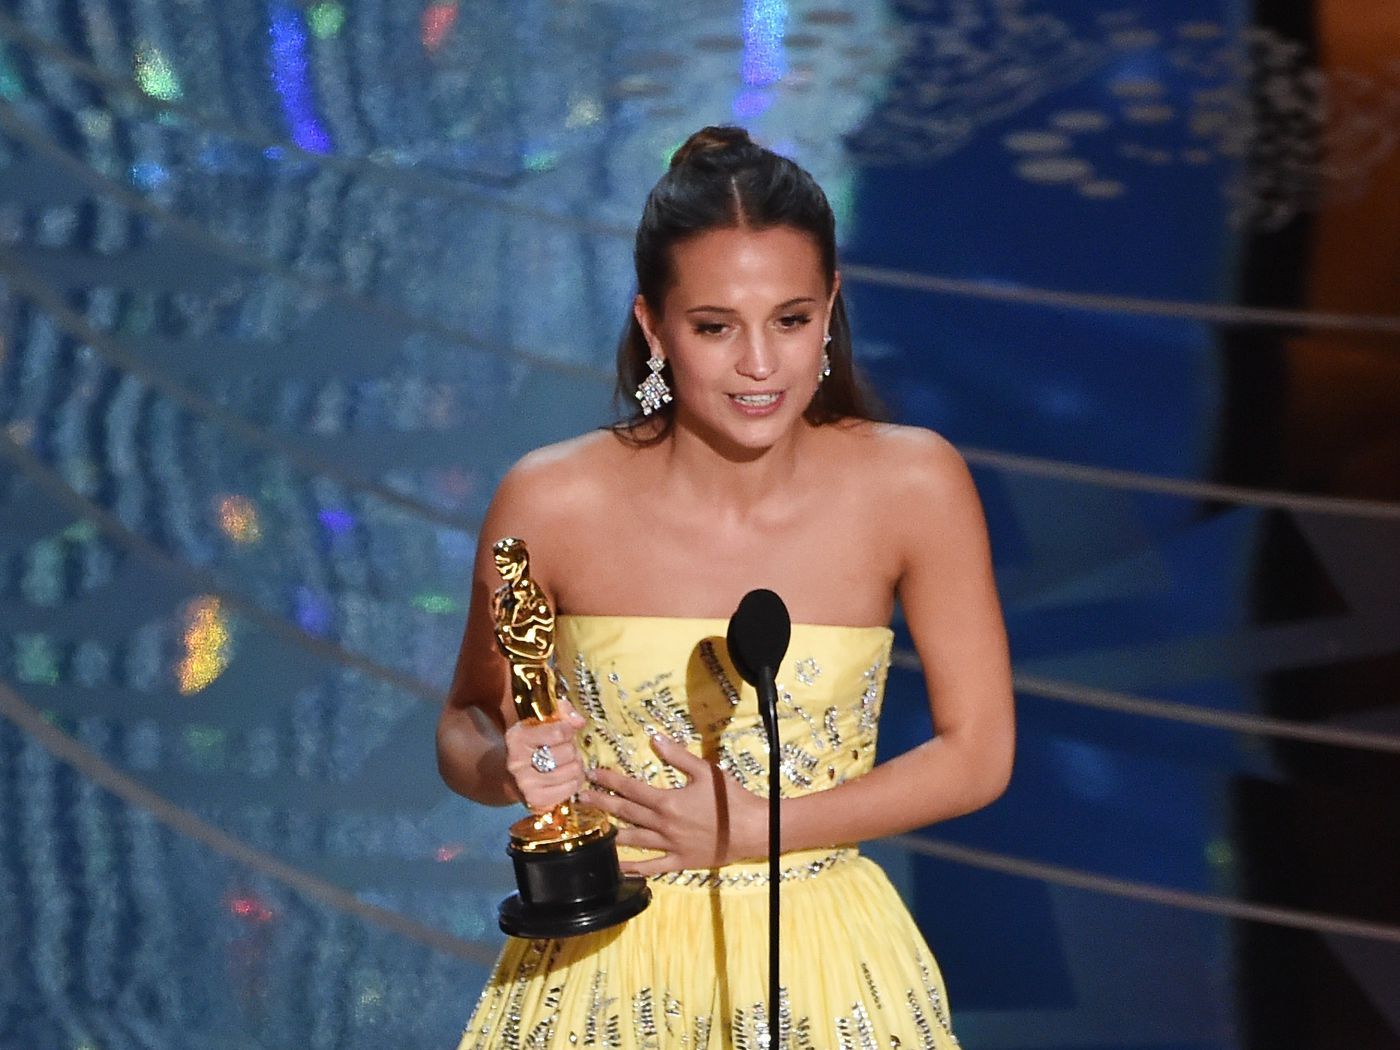 Oscars 2016: Alicia Vikander wins Best Supporting Actress for The Danish Girl